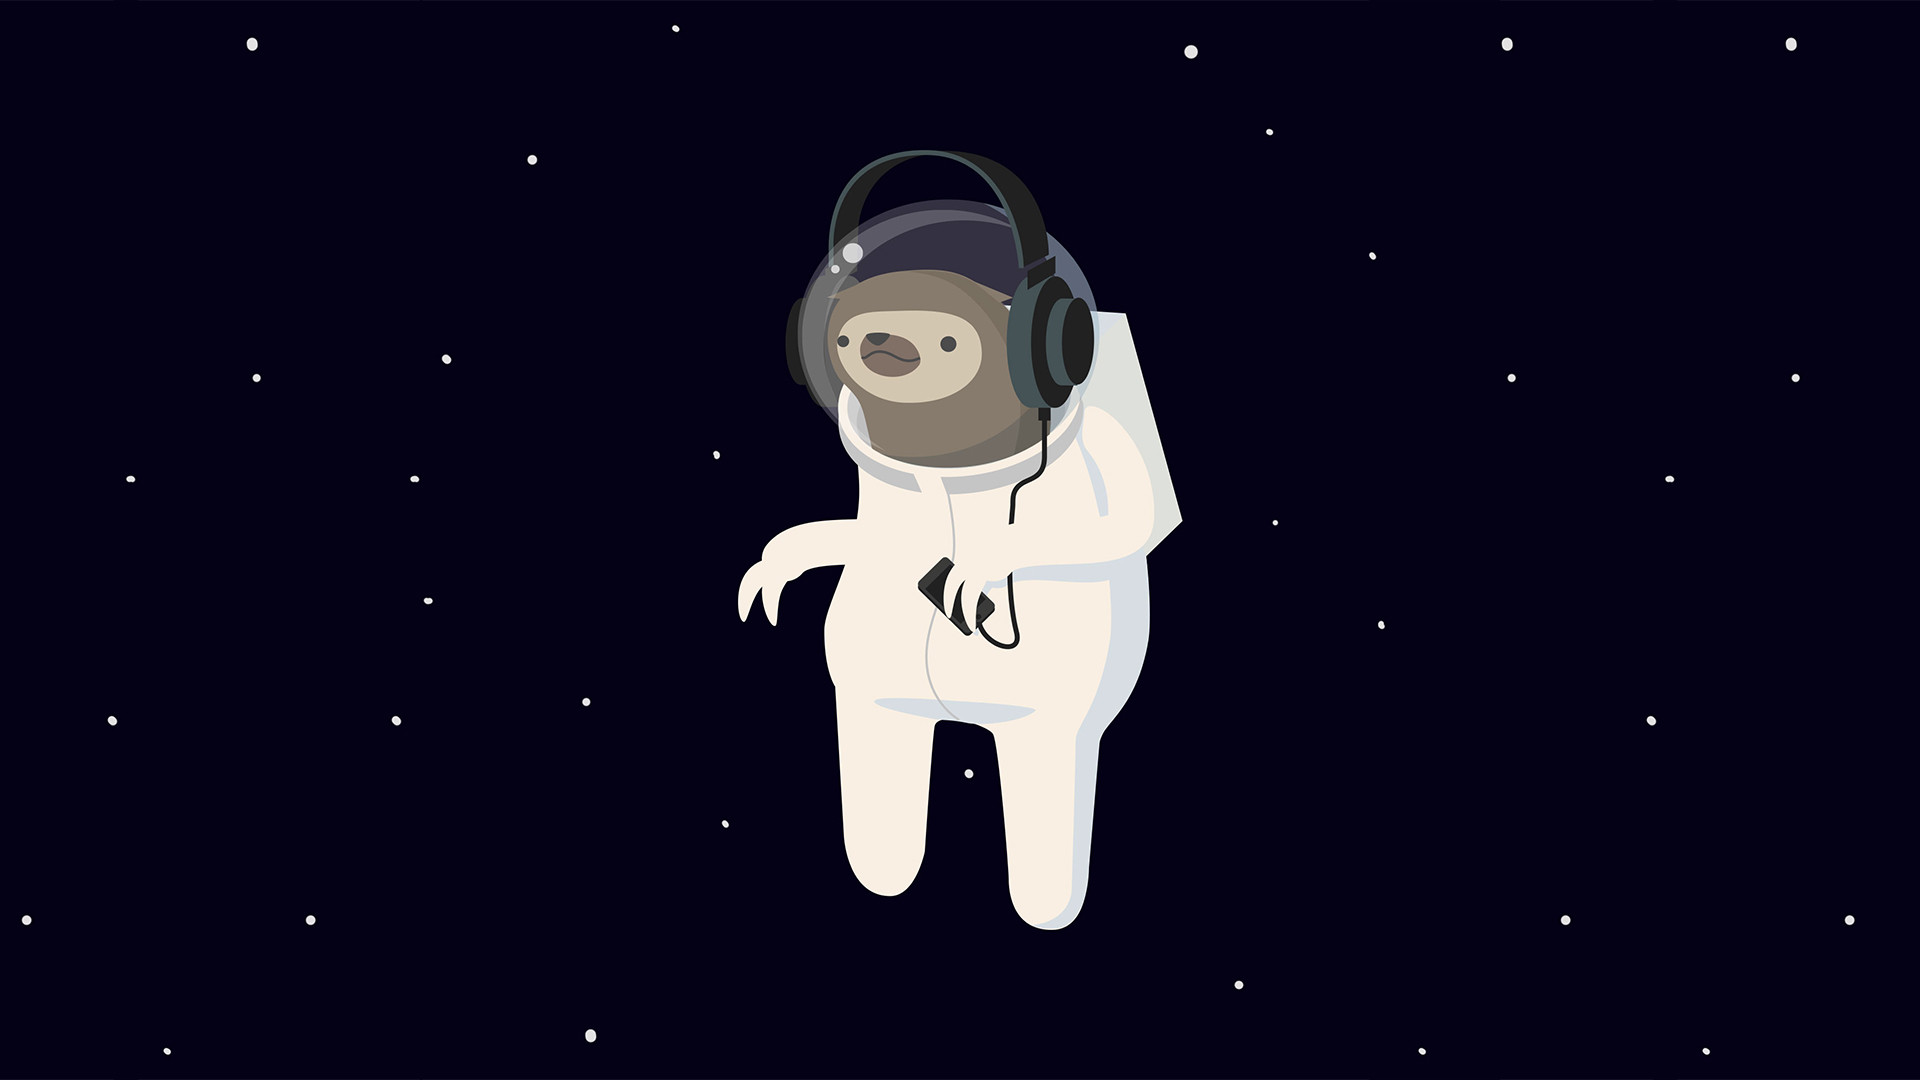 Decided to create a wallpaper of the original sloth 1920×1080